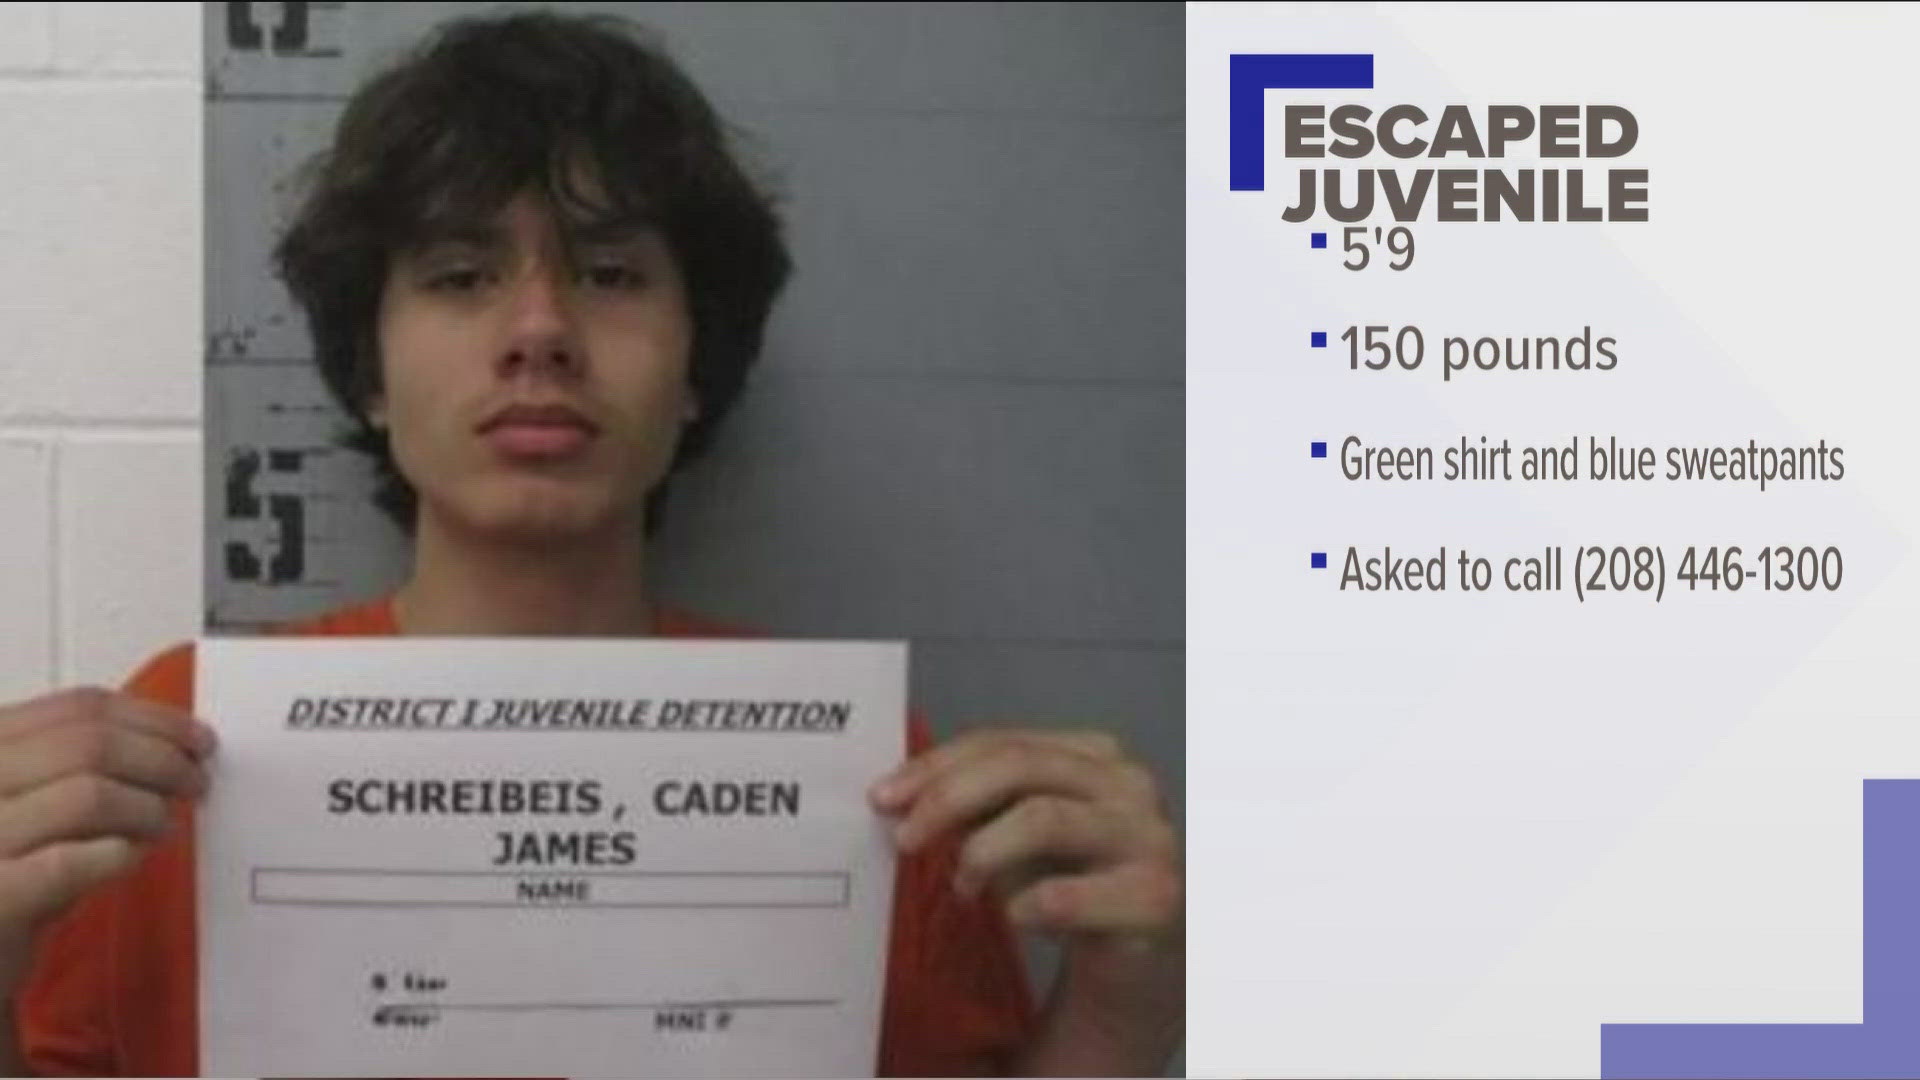 The sheriff's office says 15-year-old Caden Schreibeis was last seen wearing a green shirt and blue sweatpants.